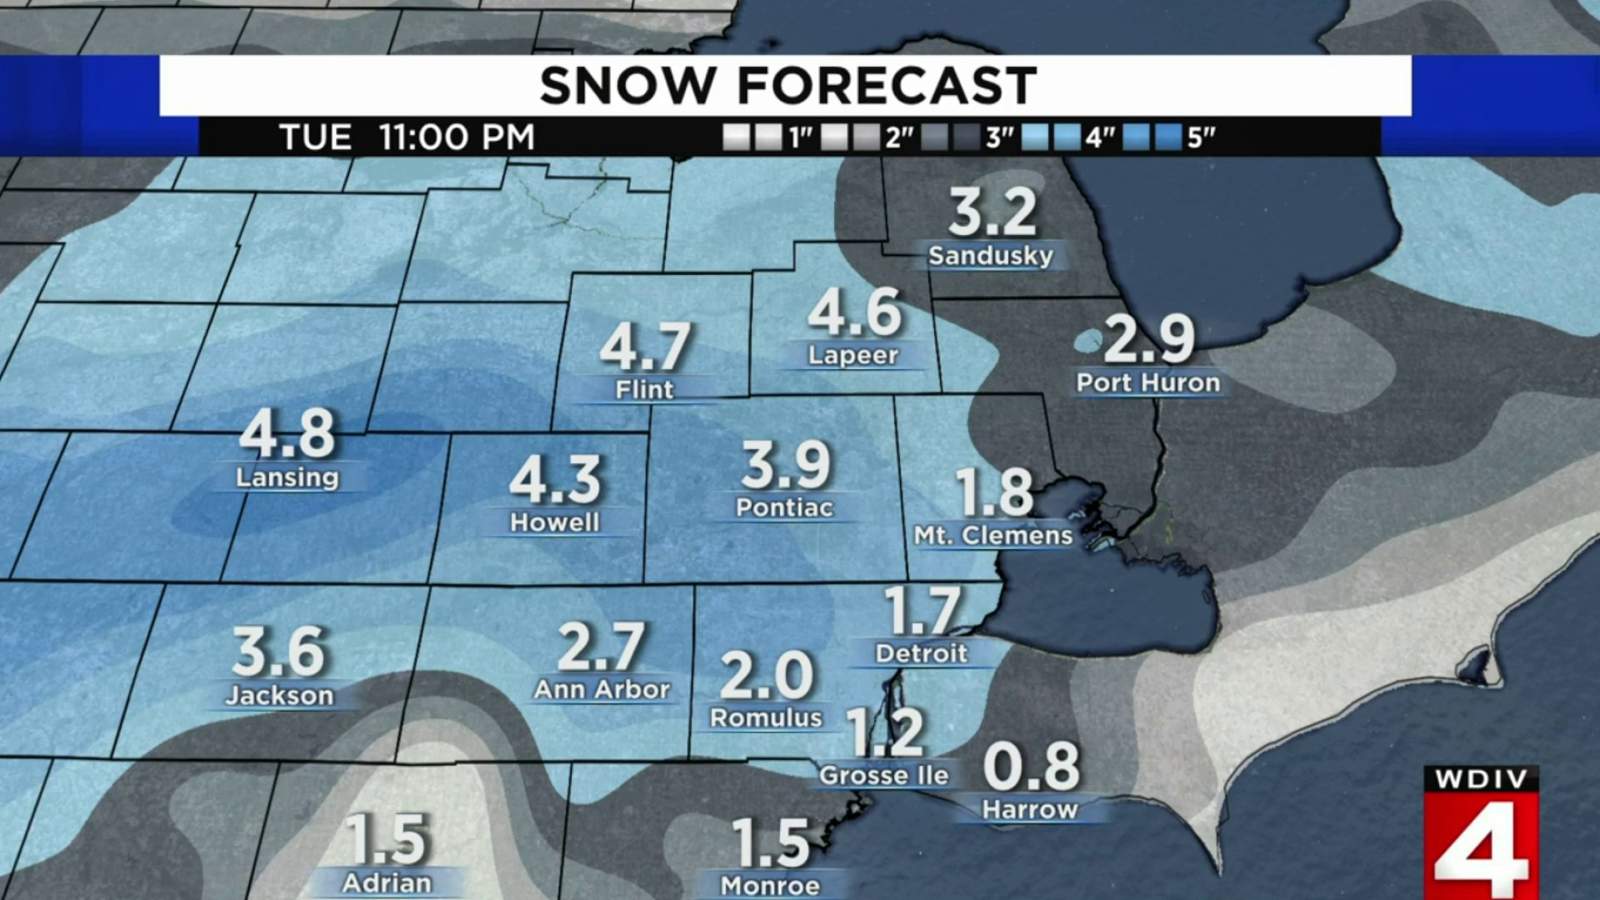 More snow tonight – here’s what you can expect